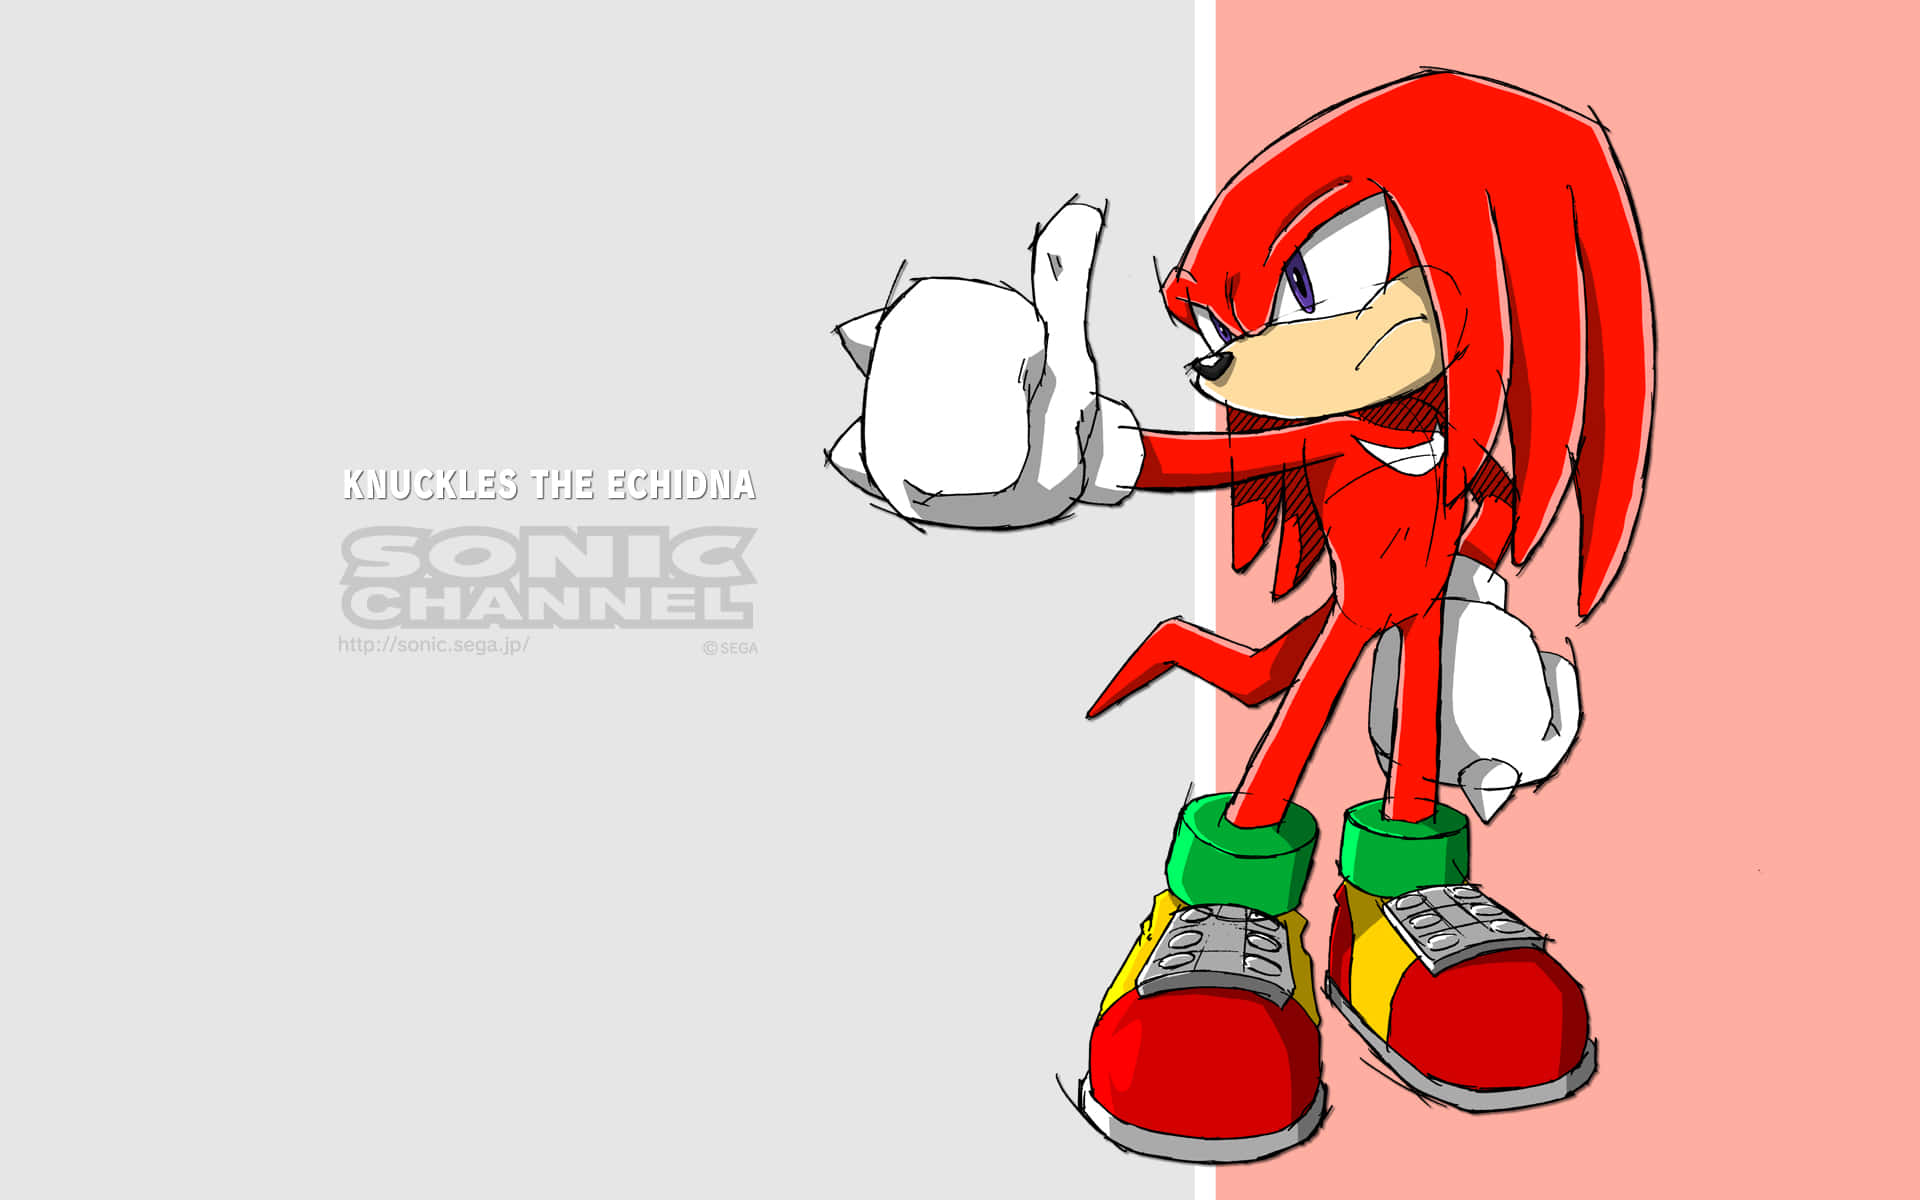 Knuckles The Echidna Stands Guard Against Injustice And Danger.